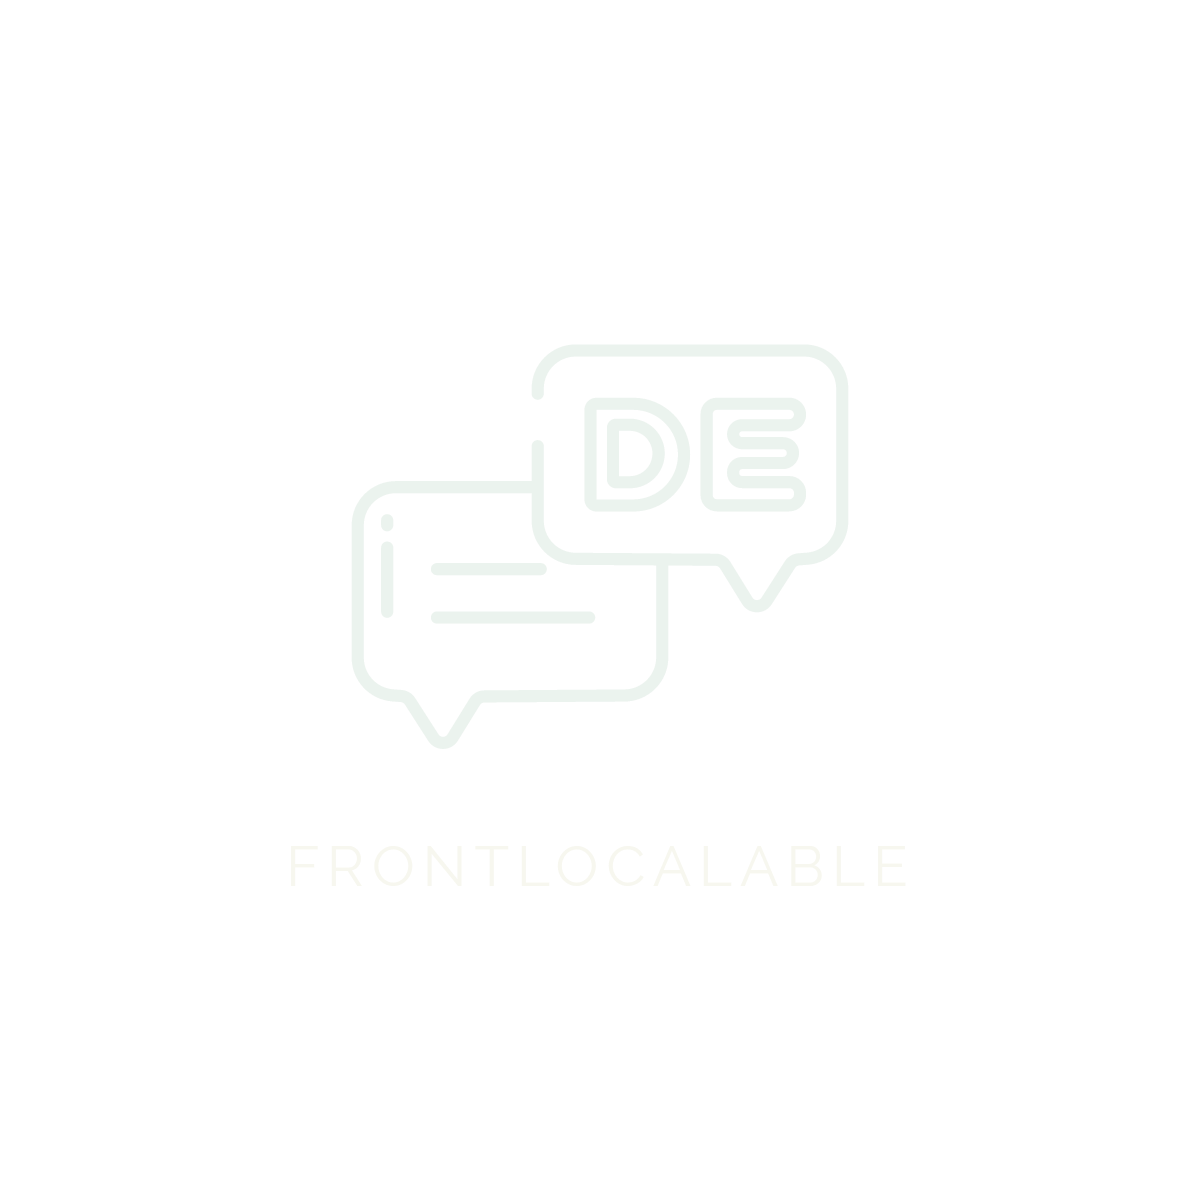 FrontLocalable